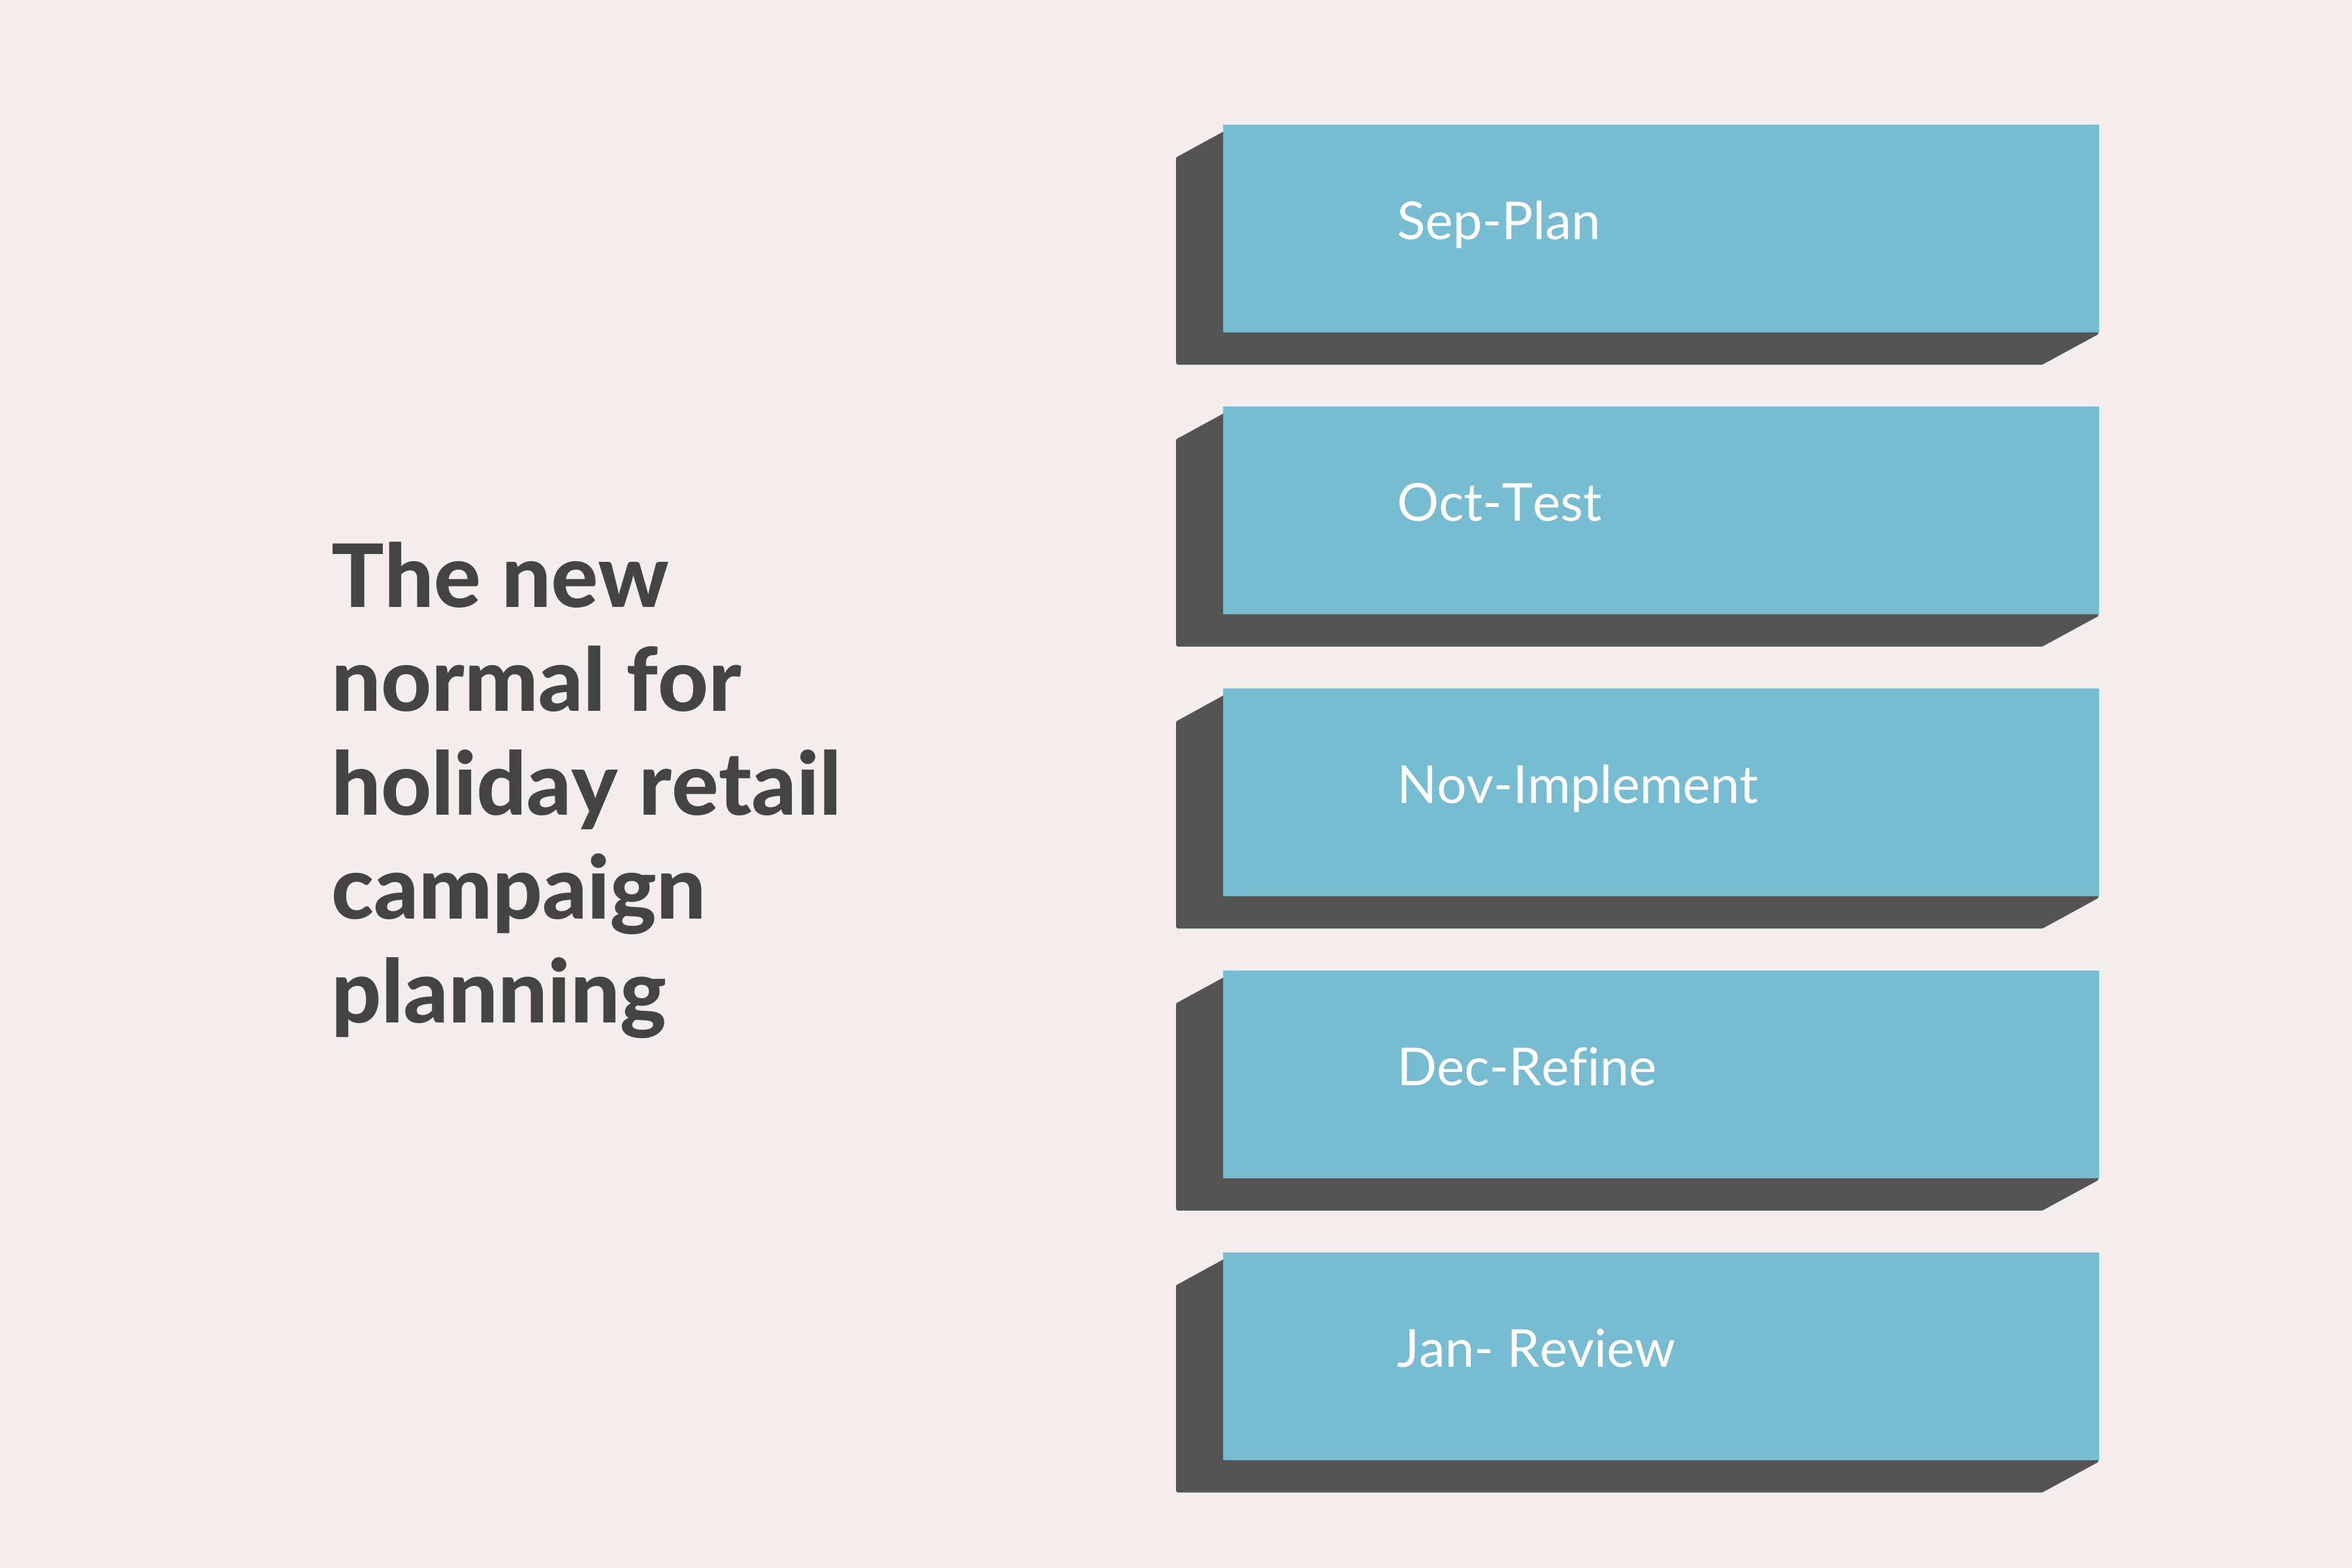 The new normal for holiday retail campaign planning:

September = plan
October = test
November = implement
December = refine
January = review